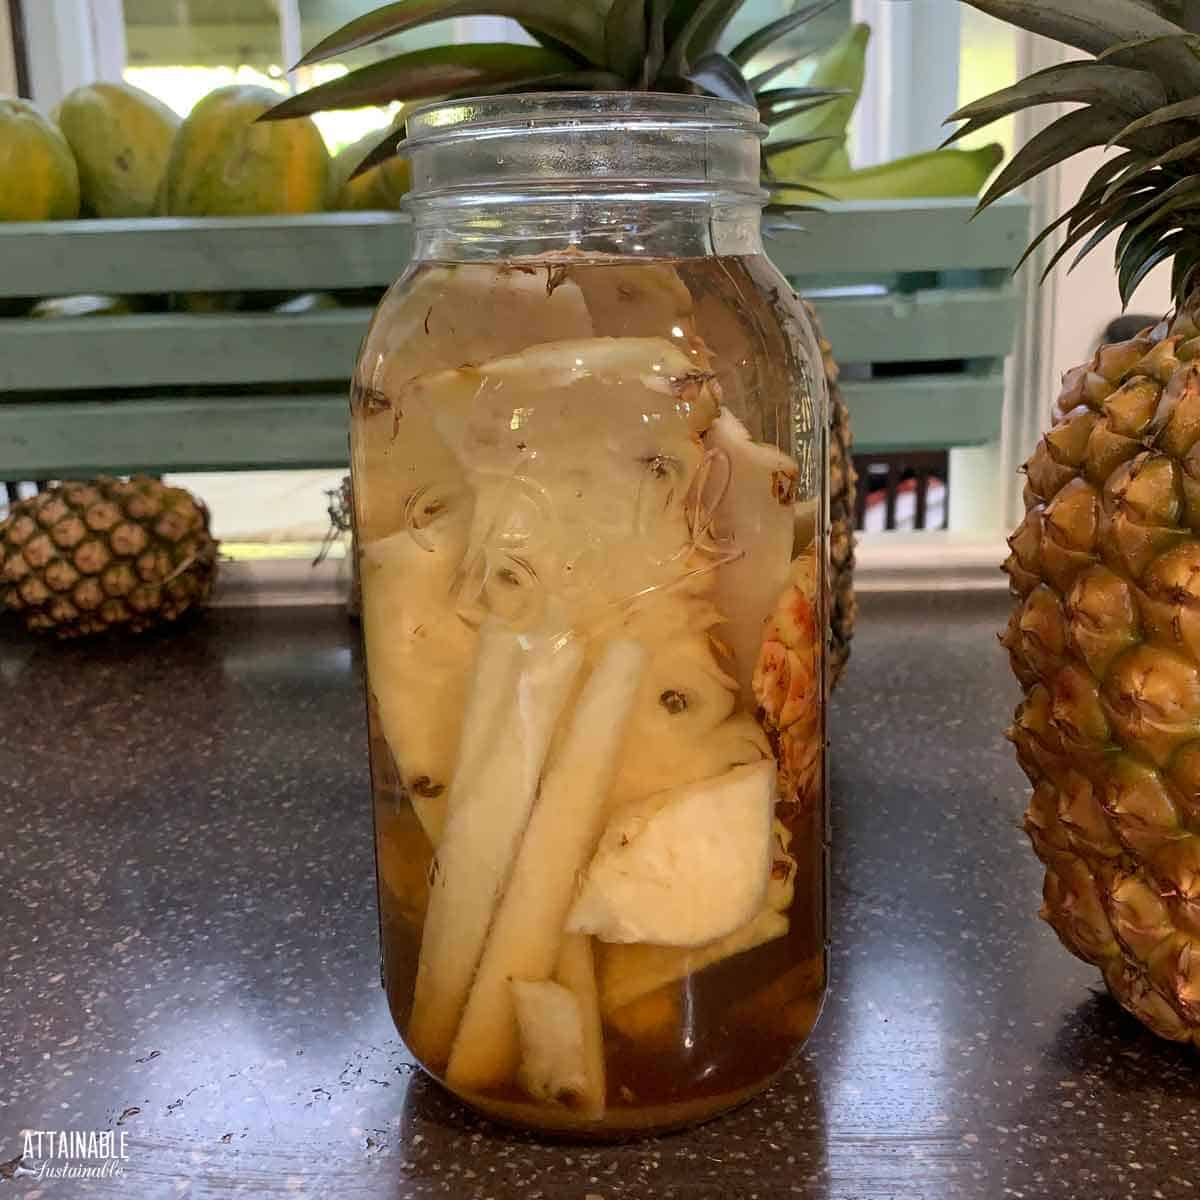 Pineapple skins in a jar with liquid.